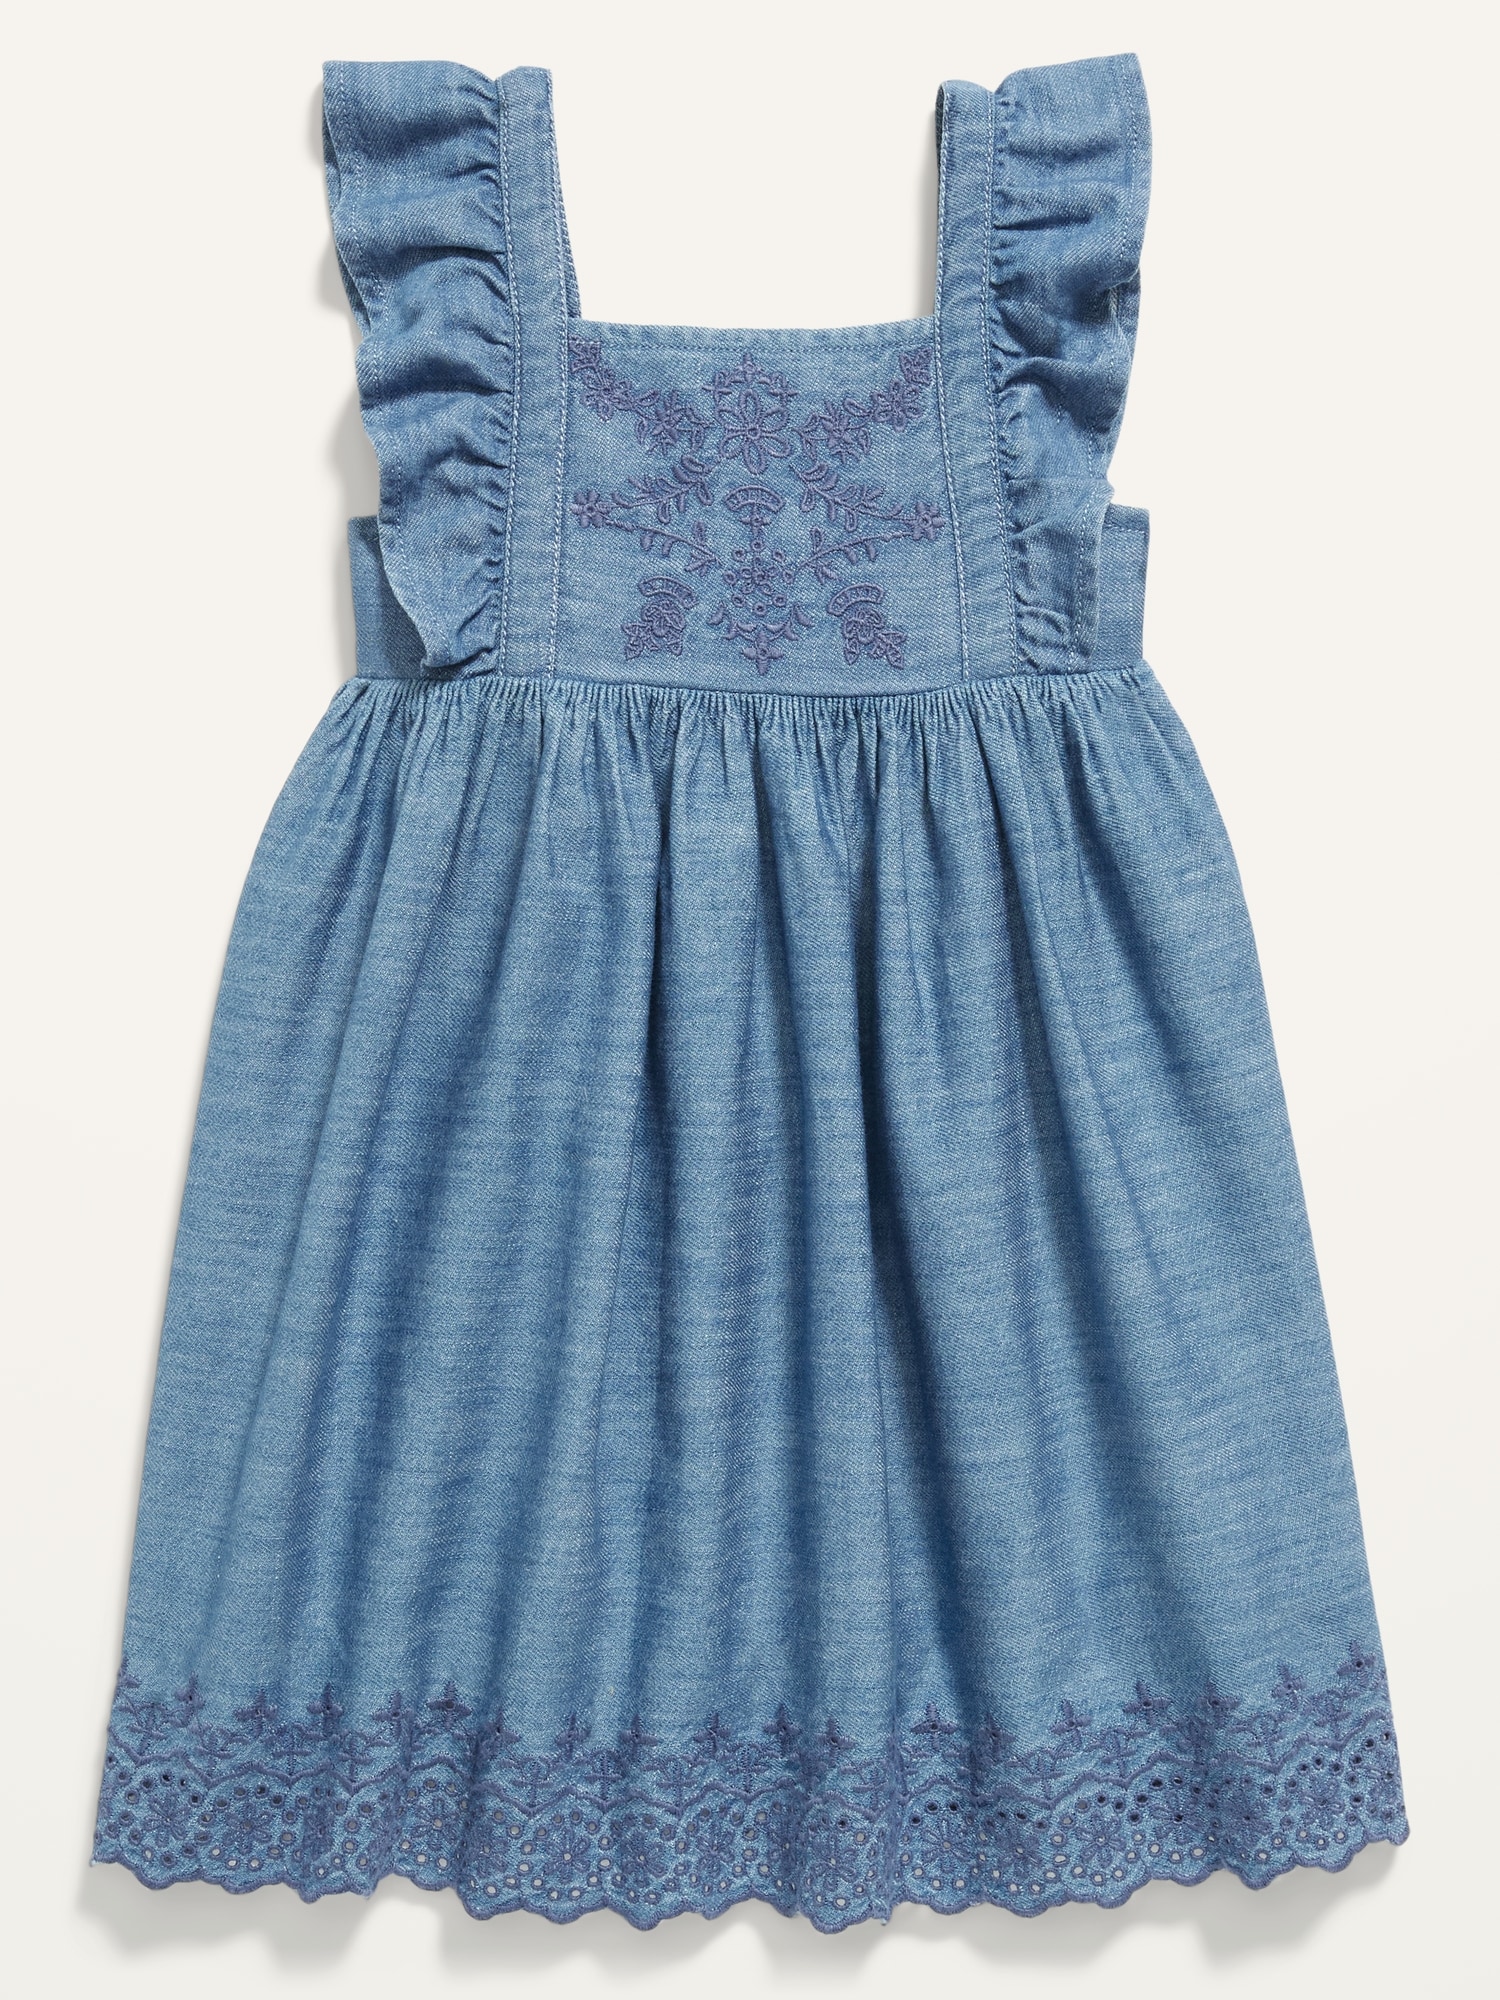 Matching Chambray Embroidered Ruffle-Trim Swing Dress for Toddler Girls ...